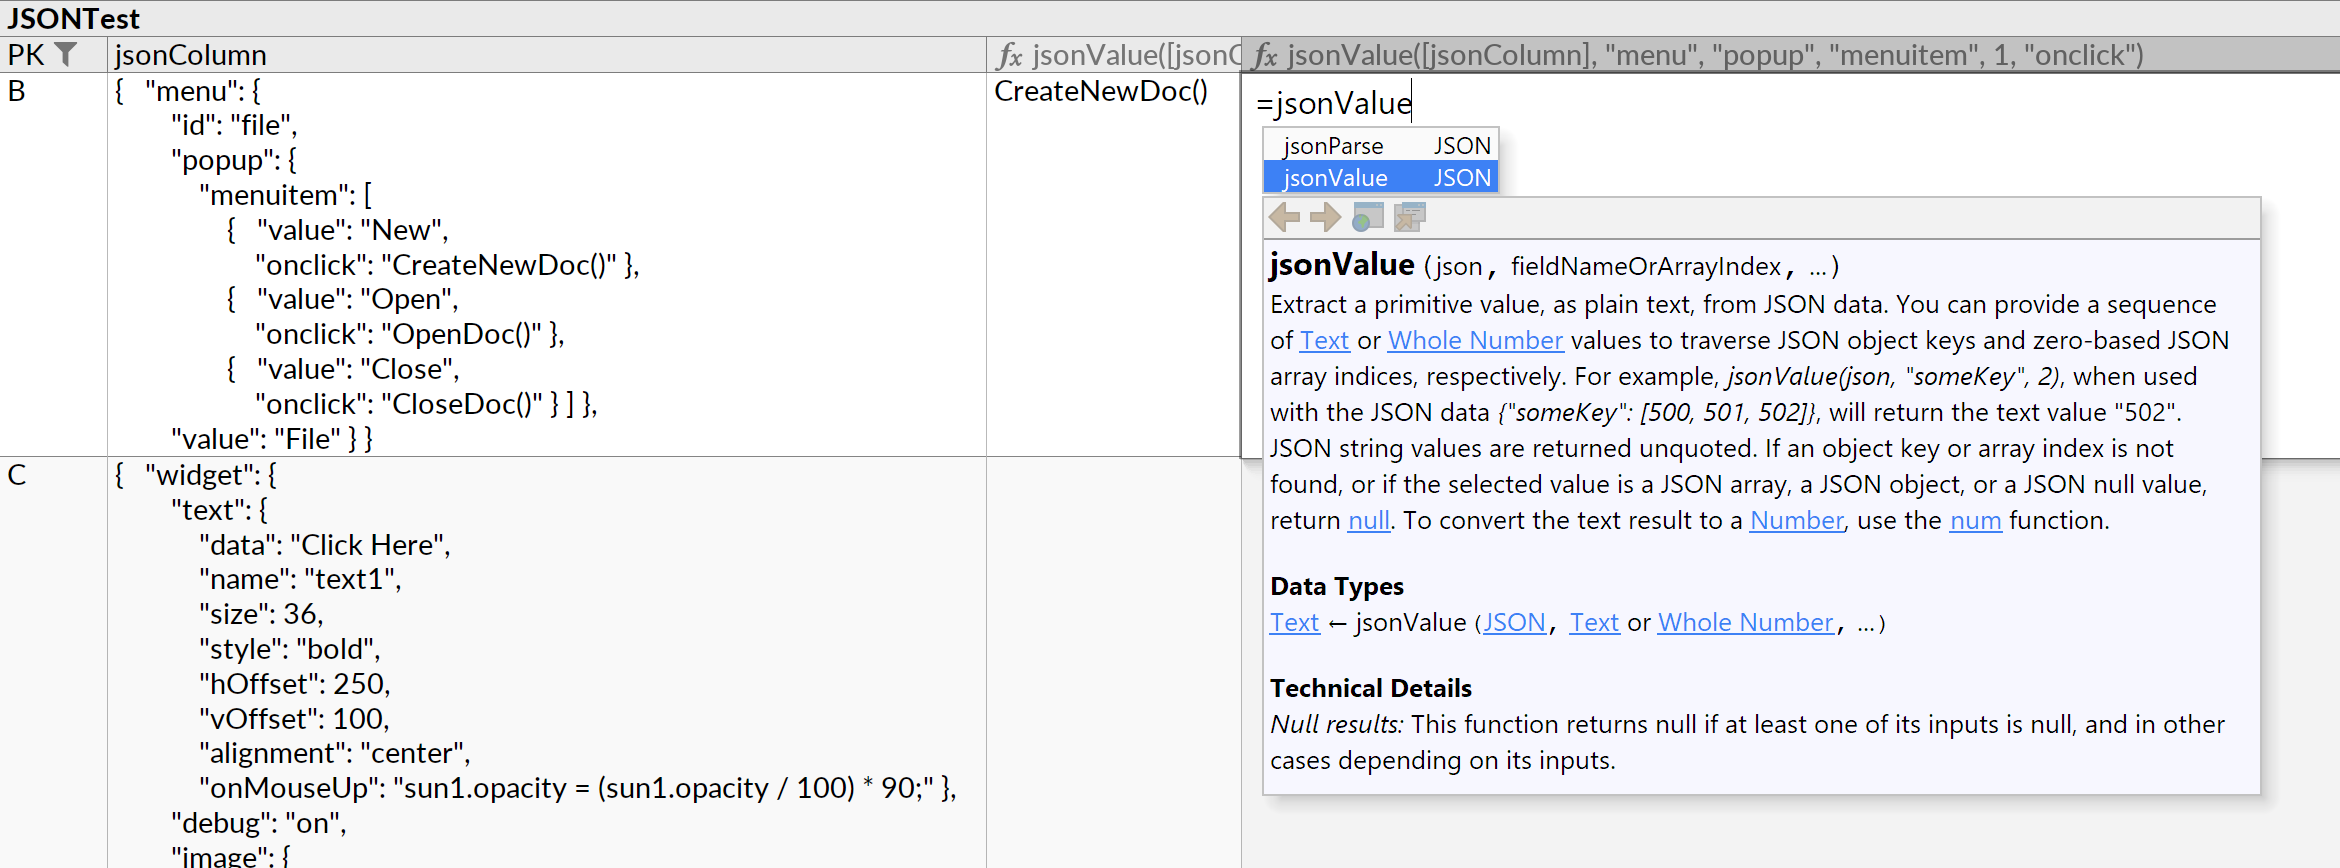 Screenshot showing pretty-printing of JSON data, and online documentation for the jsonValue formula function.